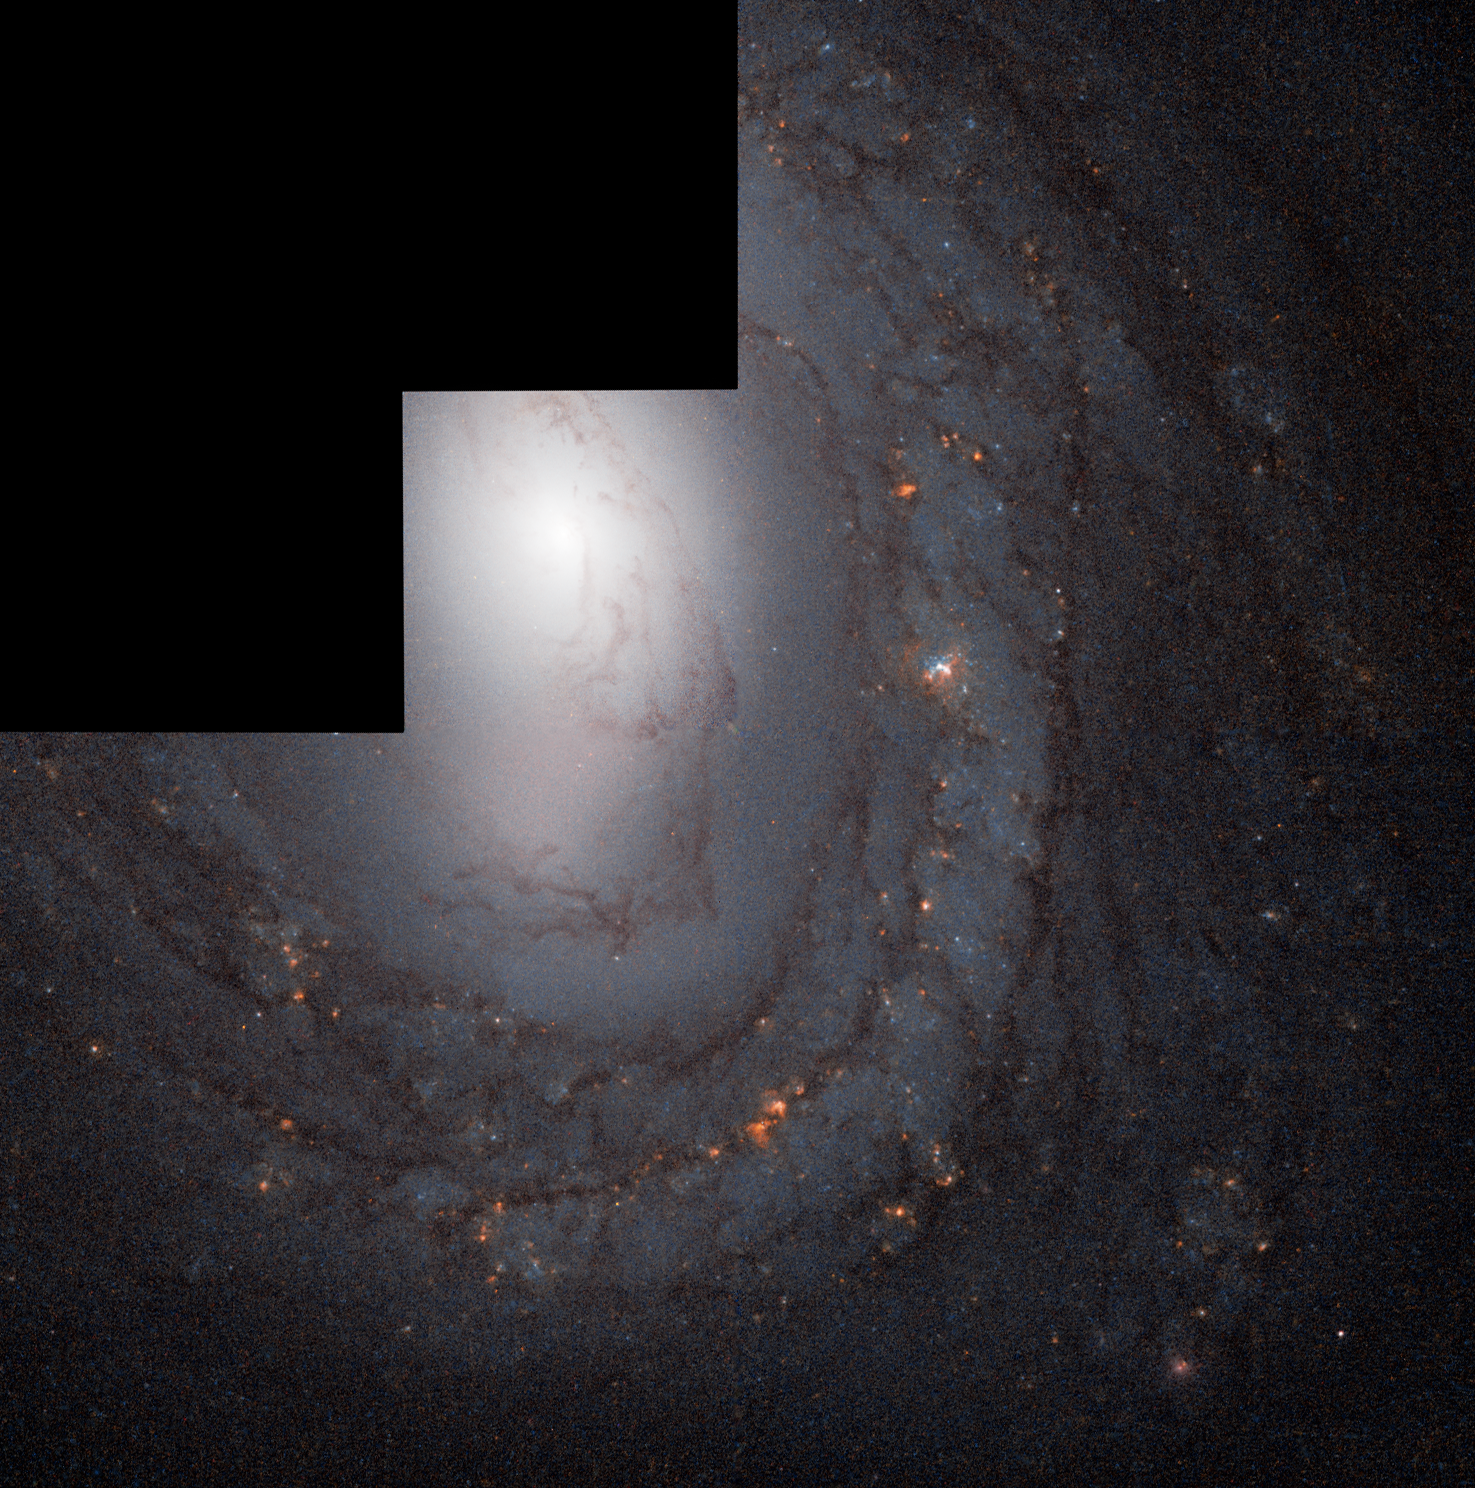 Spiral galaxy seen from above. Bright central core is white due to the light from so many stars, on the outer edge of the galaxy the arms spread out, with light blue and purple dust and gas, peppered with stars.